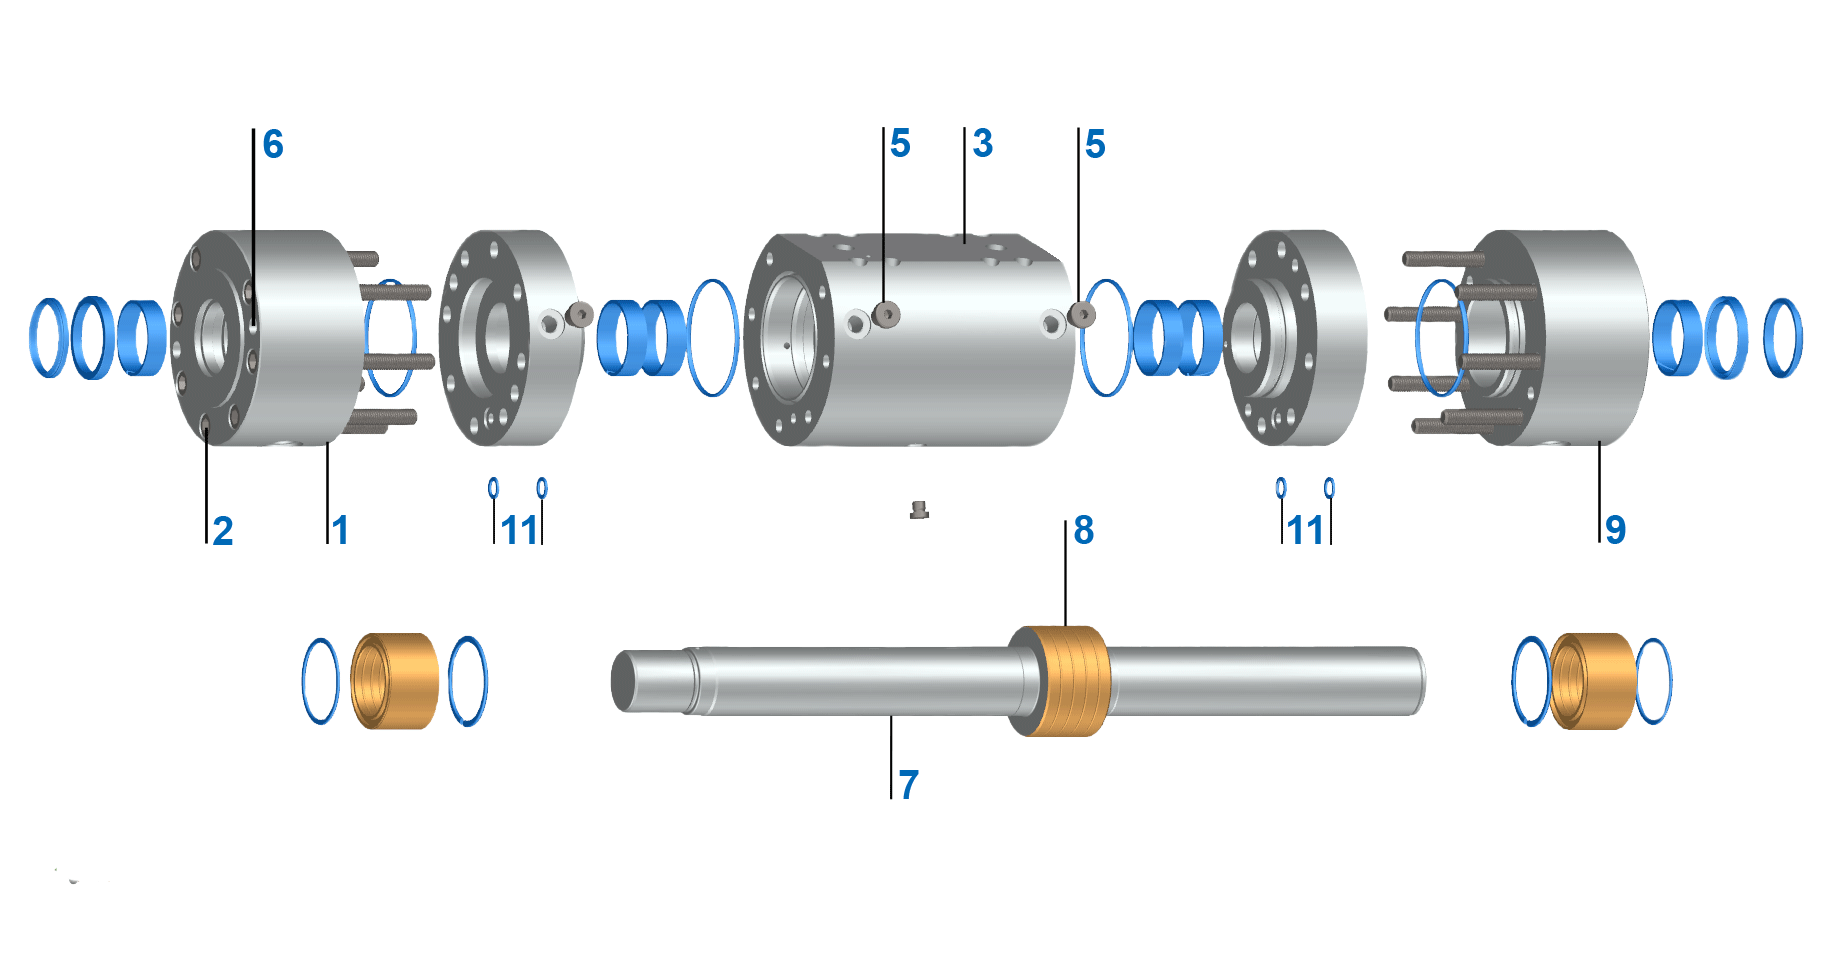 Components of a test actuator of the series 320 with Servofloat®